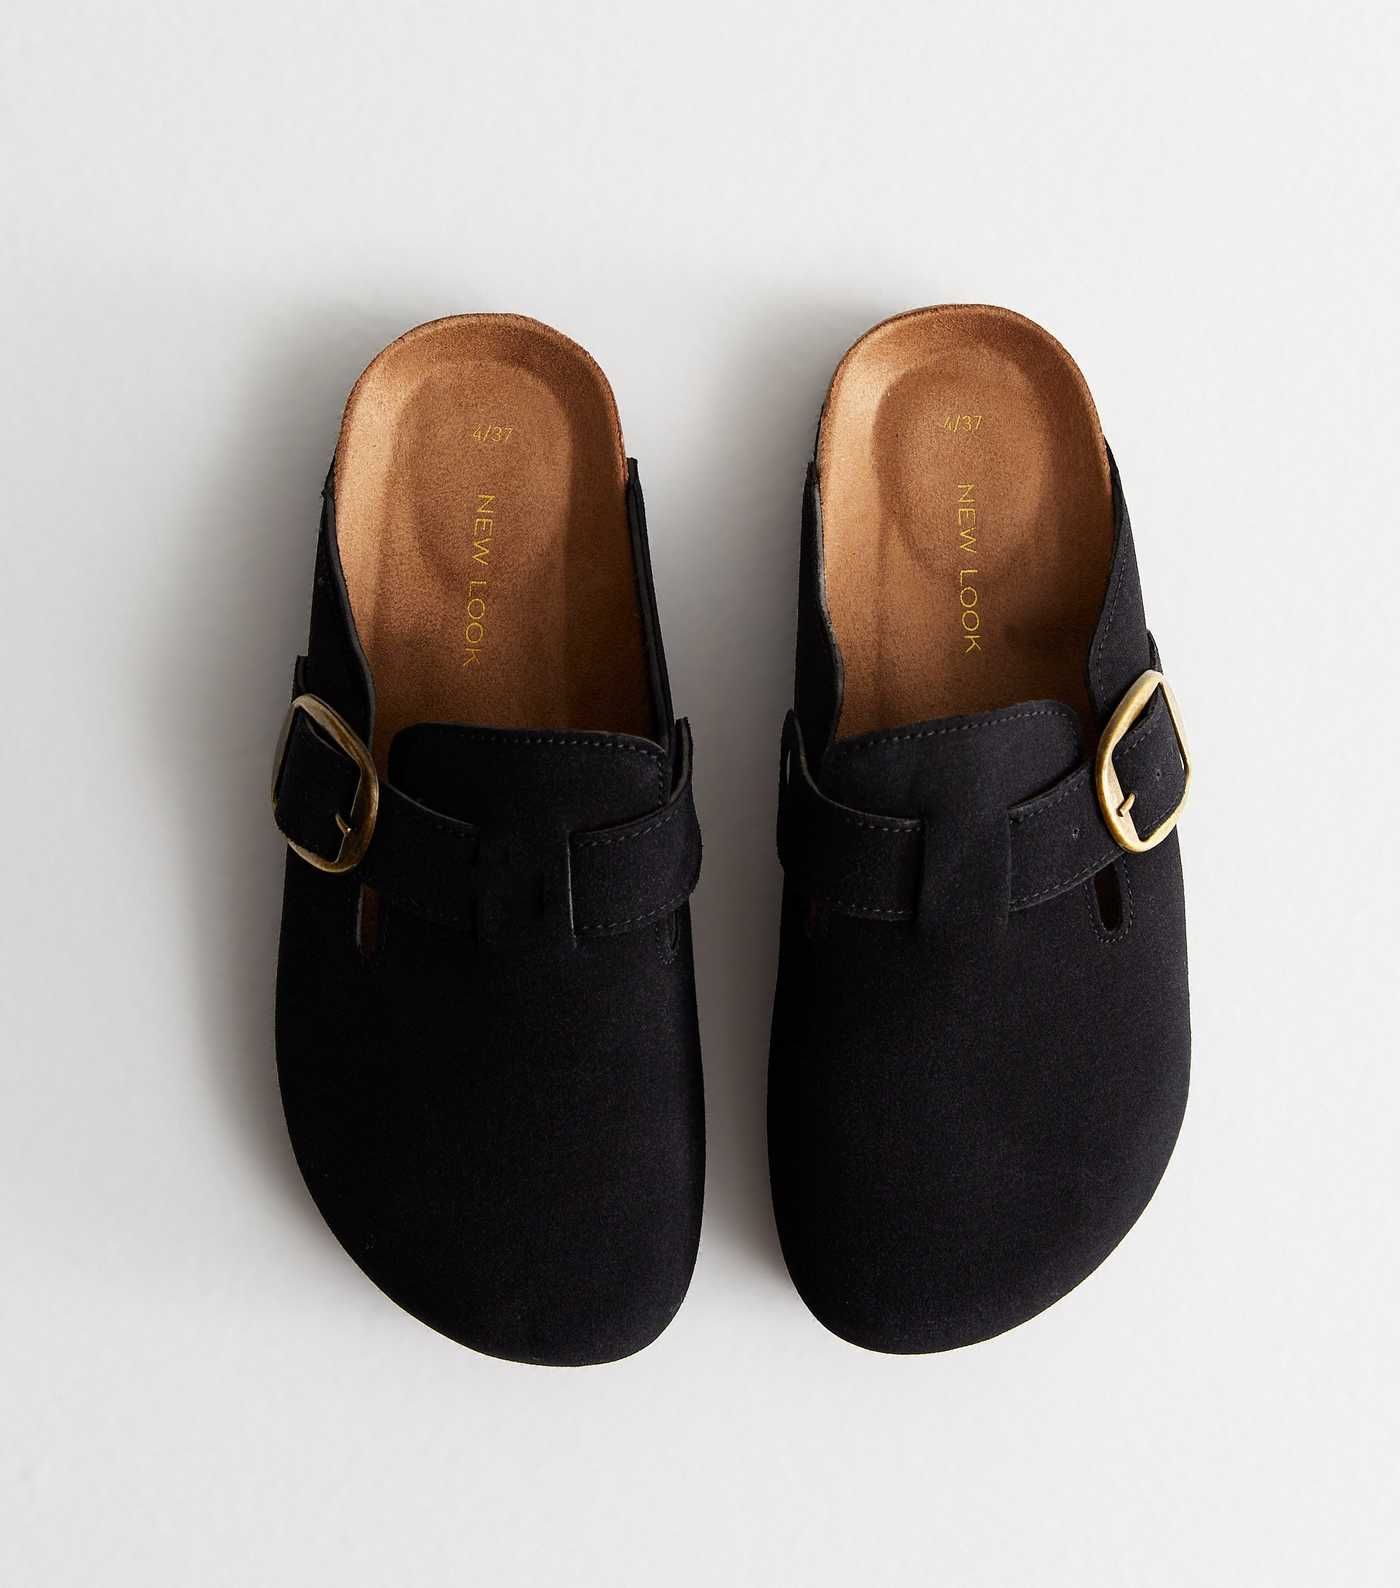 Black Suedette Mules
						
						Add to Saved Items
						Remove from Saved Items | New Look (UK)